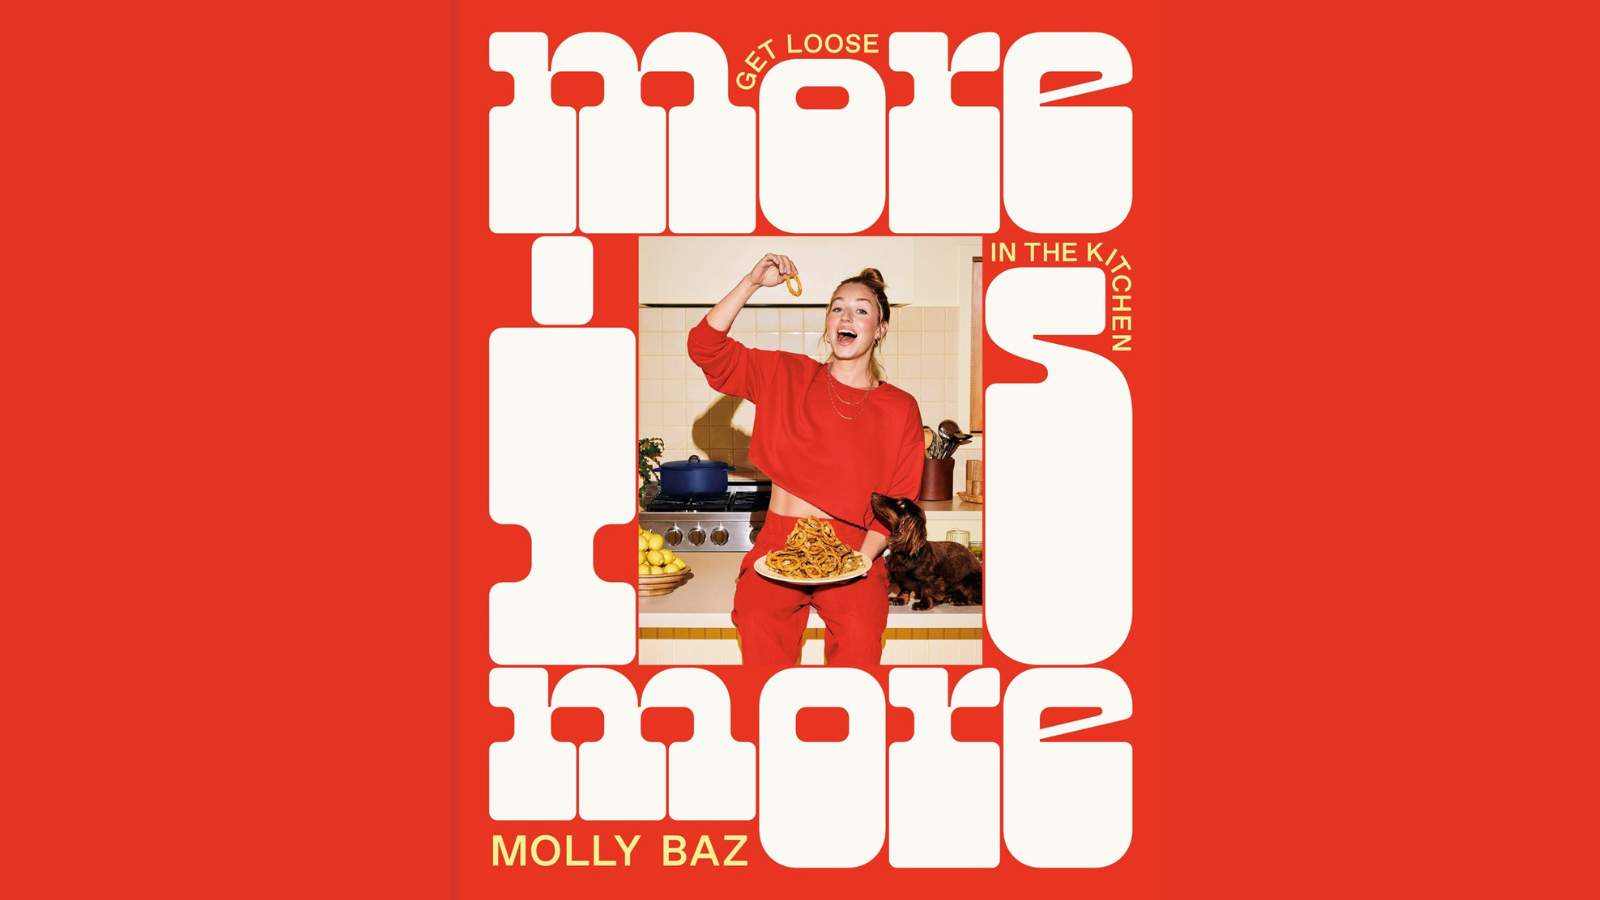 Author Event: An Evening with Molly Baz, More is More